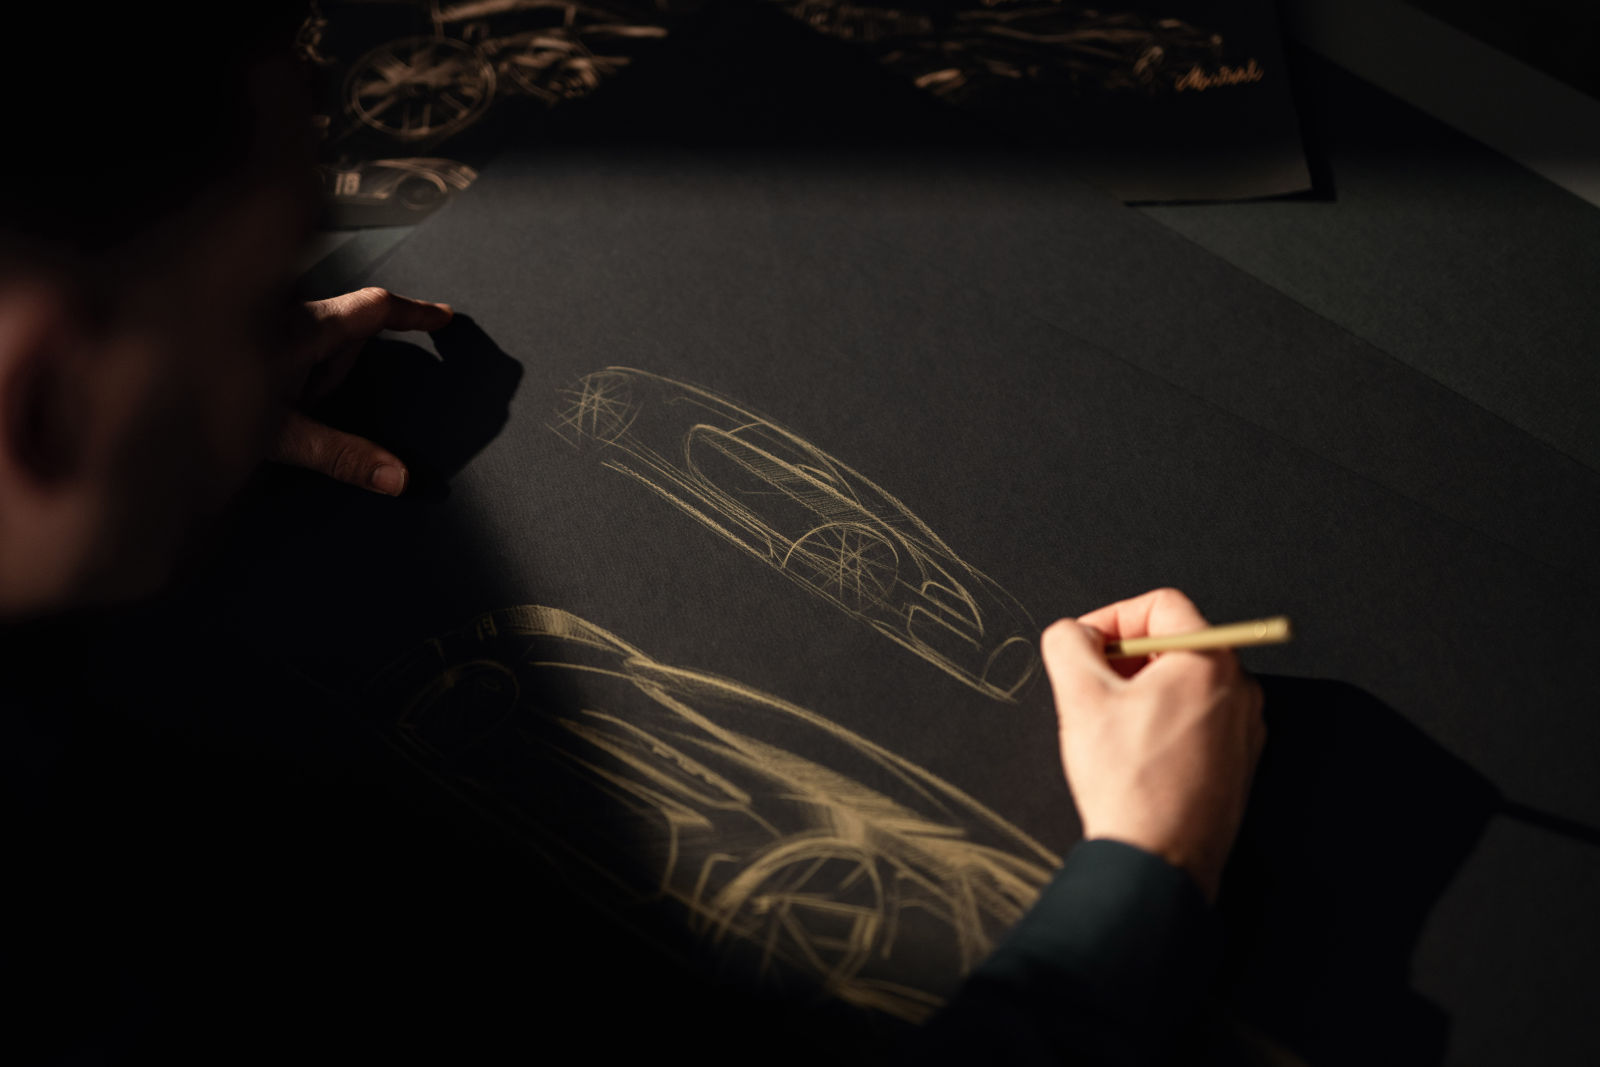 The Bugatti Chiron Super Sport ‘Golden Era’ is the pinnacle of handcrafted luxury